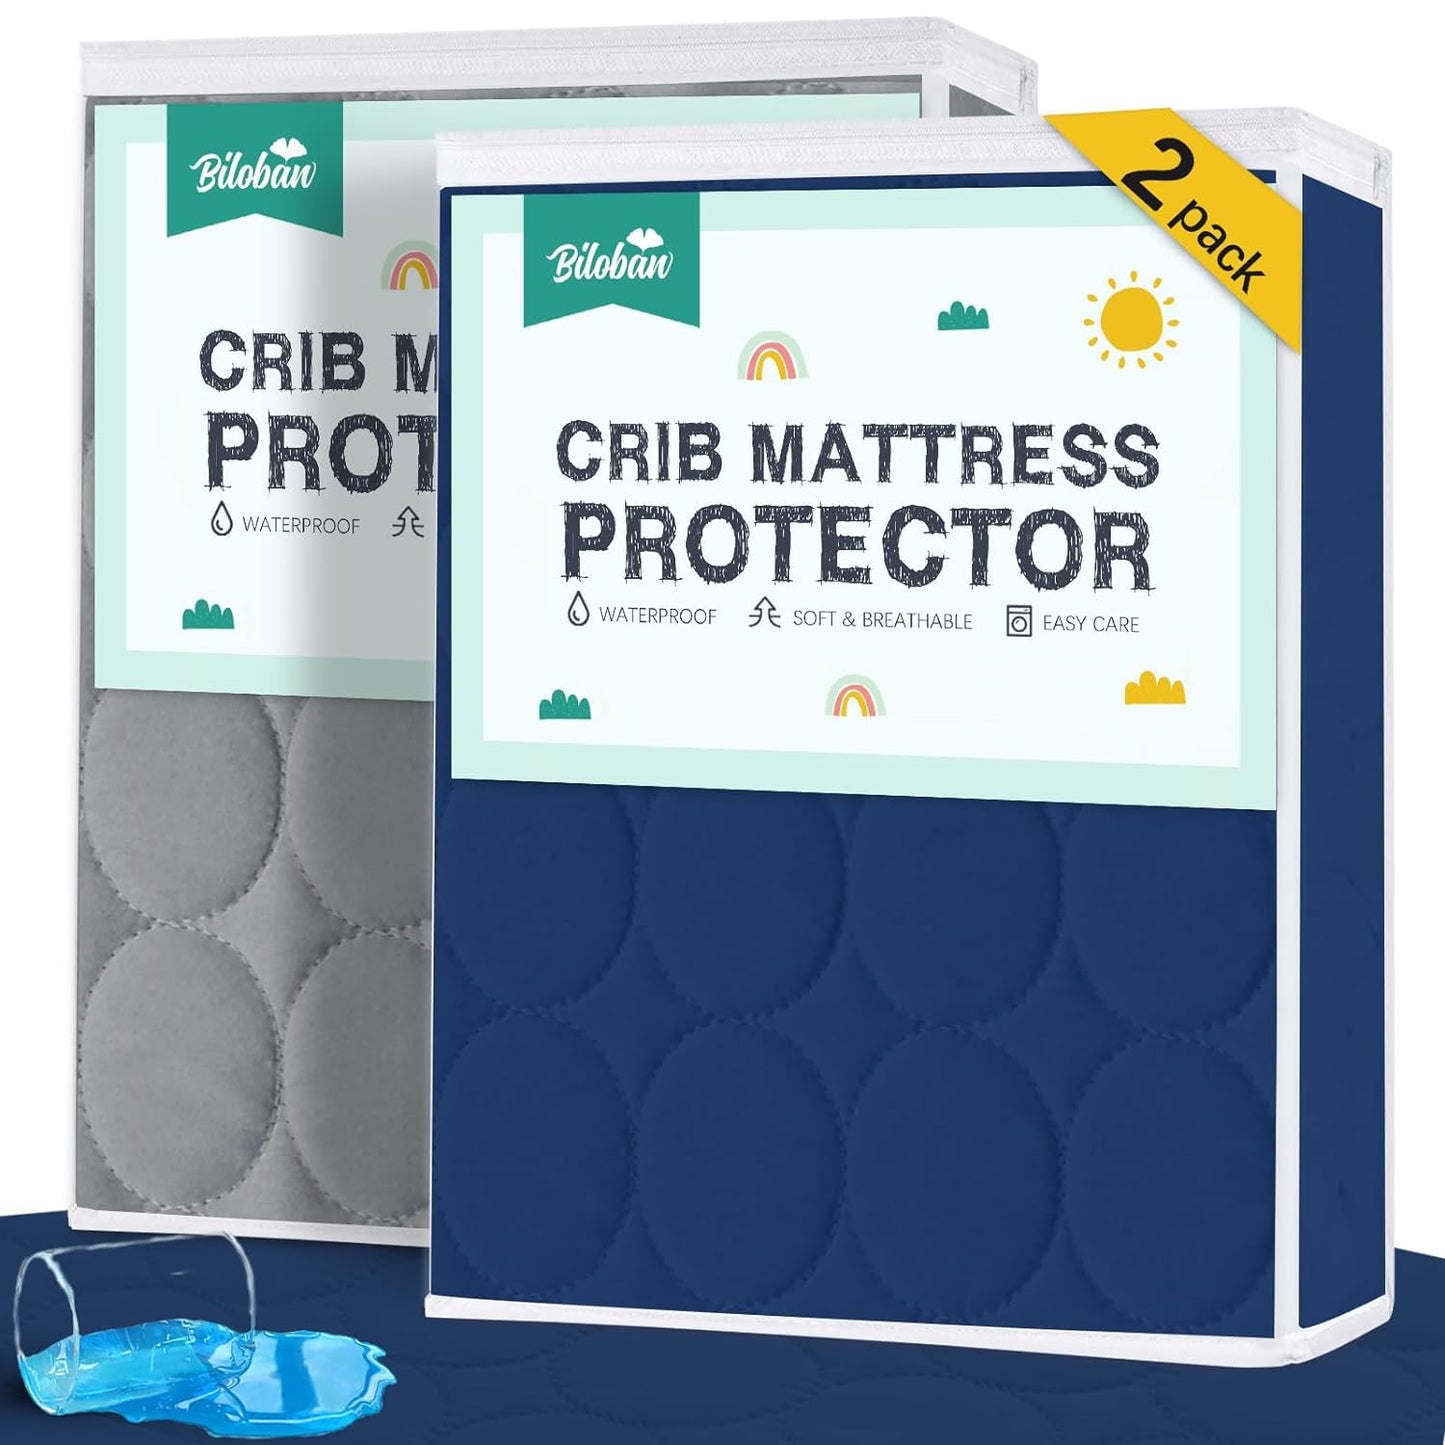 Crib Mattress Protector/ Pad Cover - 2 Pack, Quilted Microfiber, Waterproof, Grey & Navy (for Standard Crib/ Toddler Bed) - Biloban Online Store